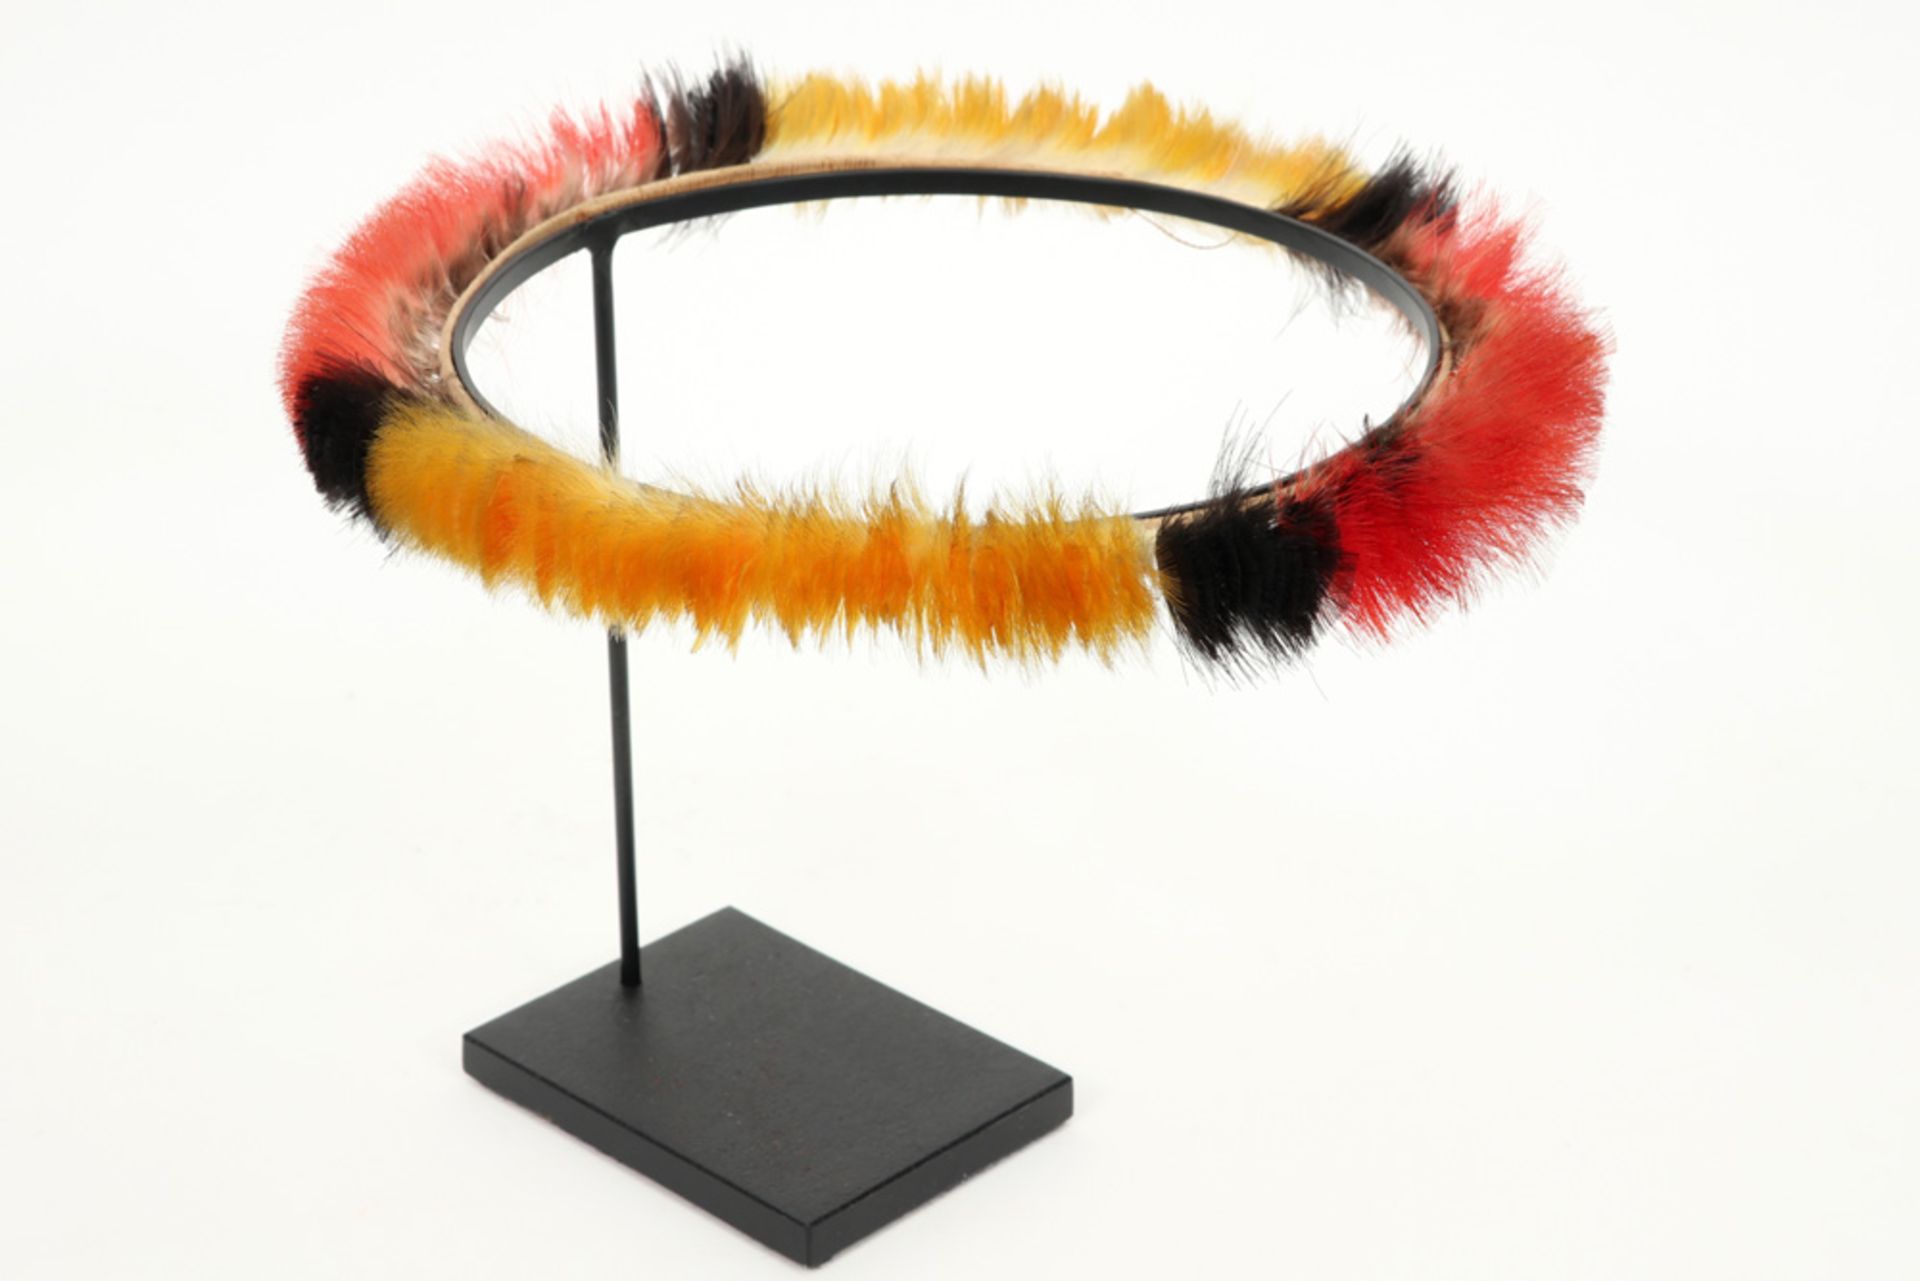 ethnic headband of the Wayana - Indians made of colorful feathers